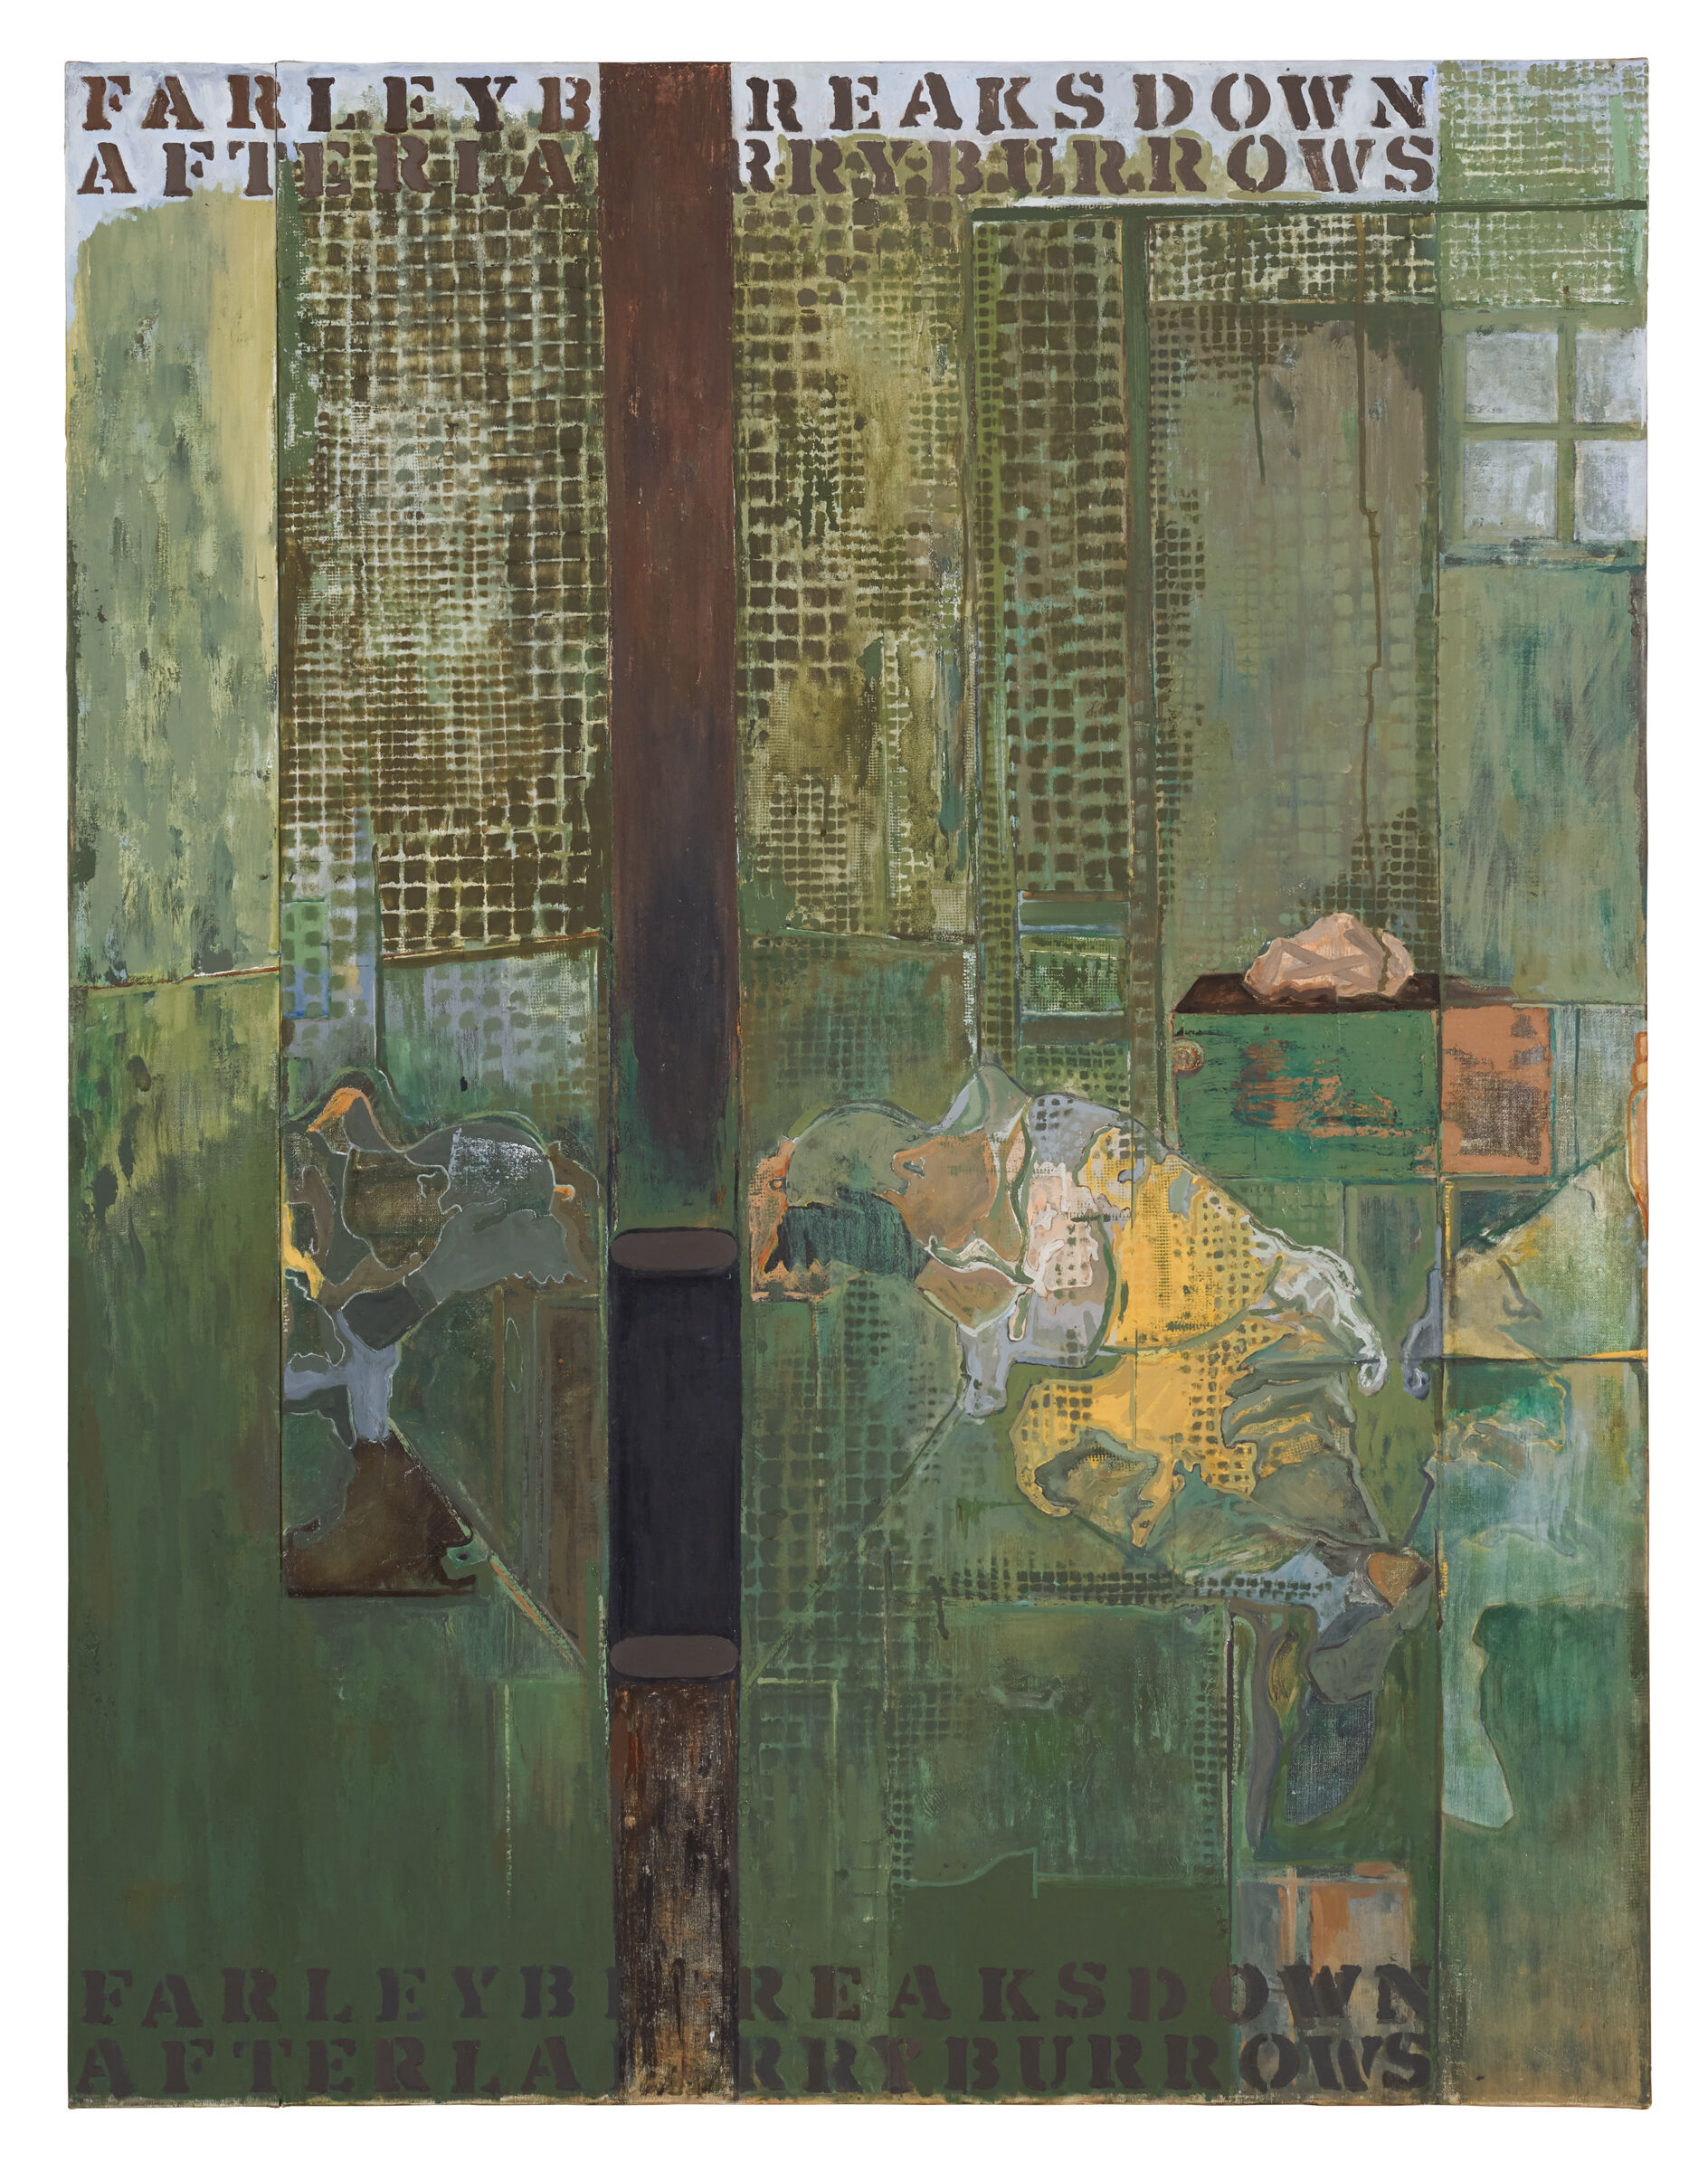 Green and brown composition of layered rectangles in different hues and patterns, with brown stenciled lettering that runs along both the top and bottom edges of the composition: "FARLEY BREAKS DOWN AFTER LARRY BURROWS".